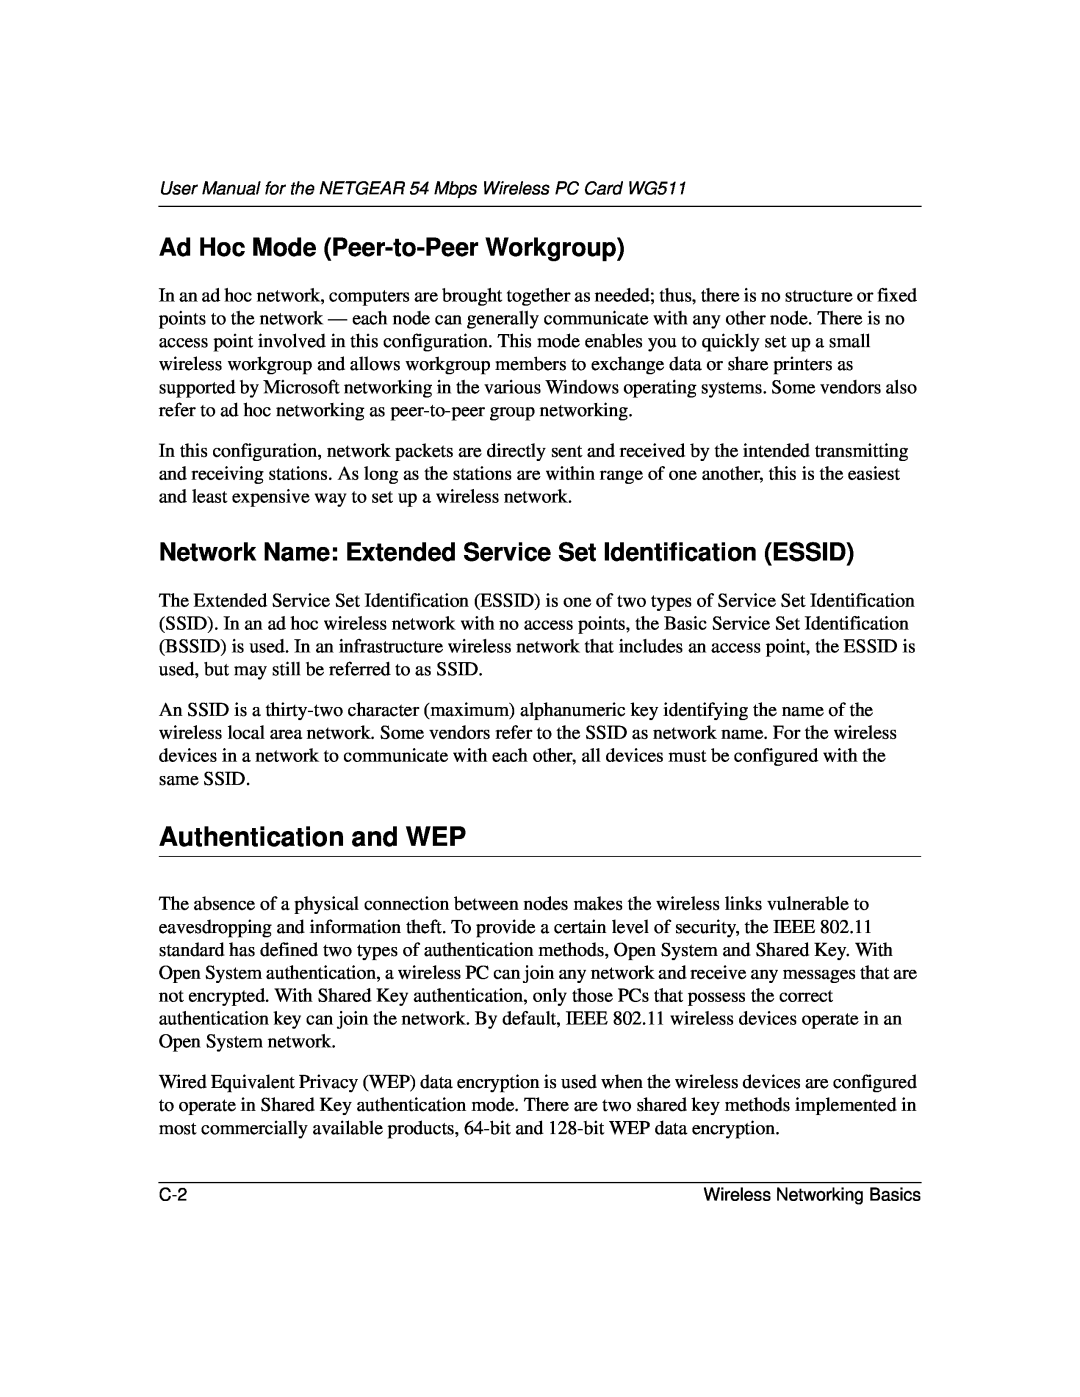 NETGEAR WGE111 user manual Authentication and WEP, Ad Hoc Mode Peer-to-Peer Workgroup 